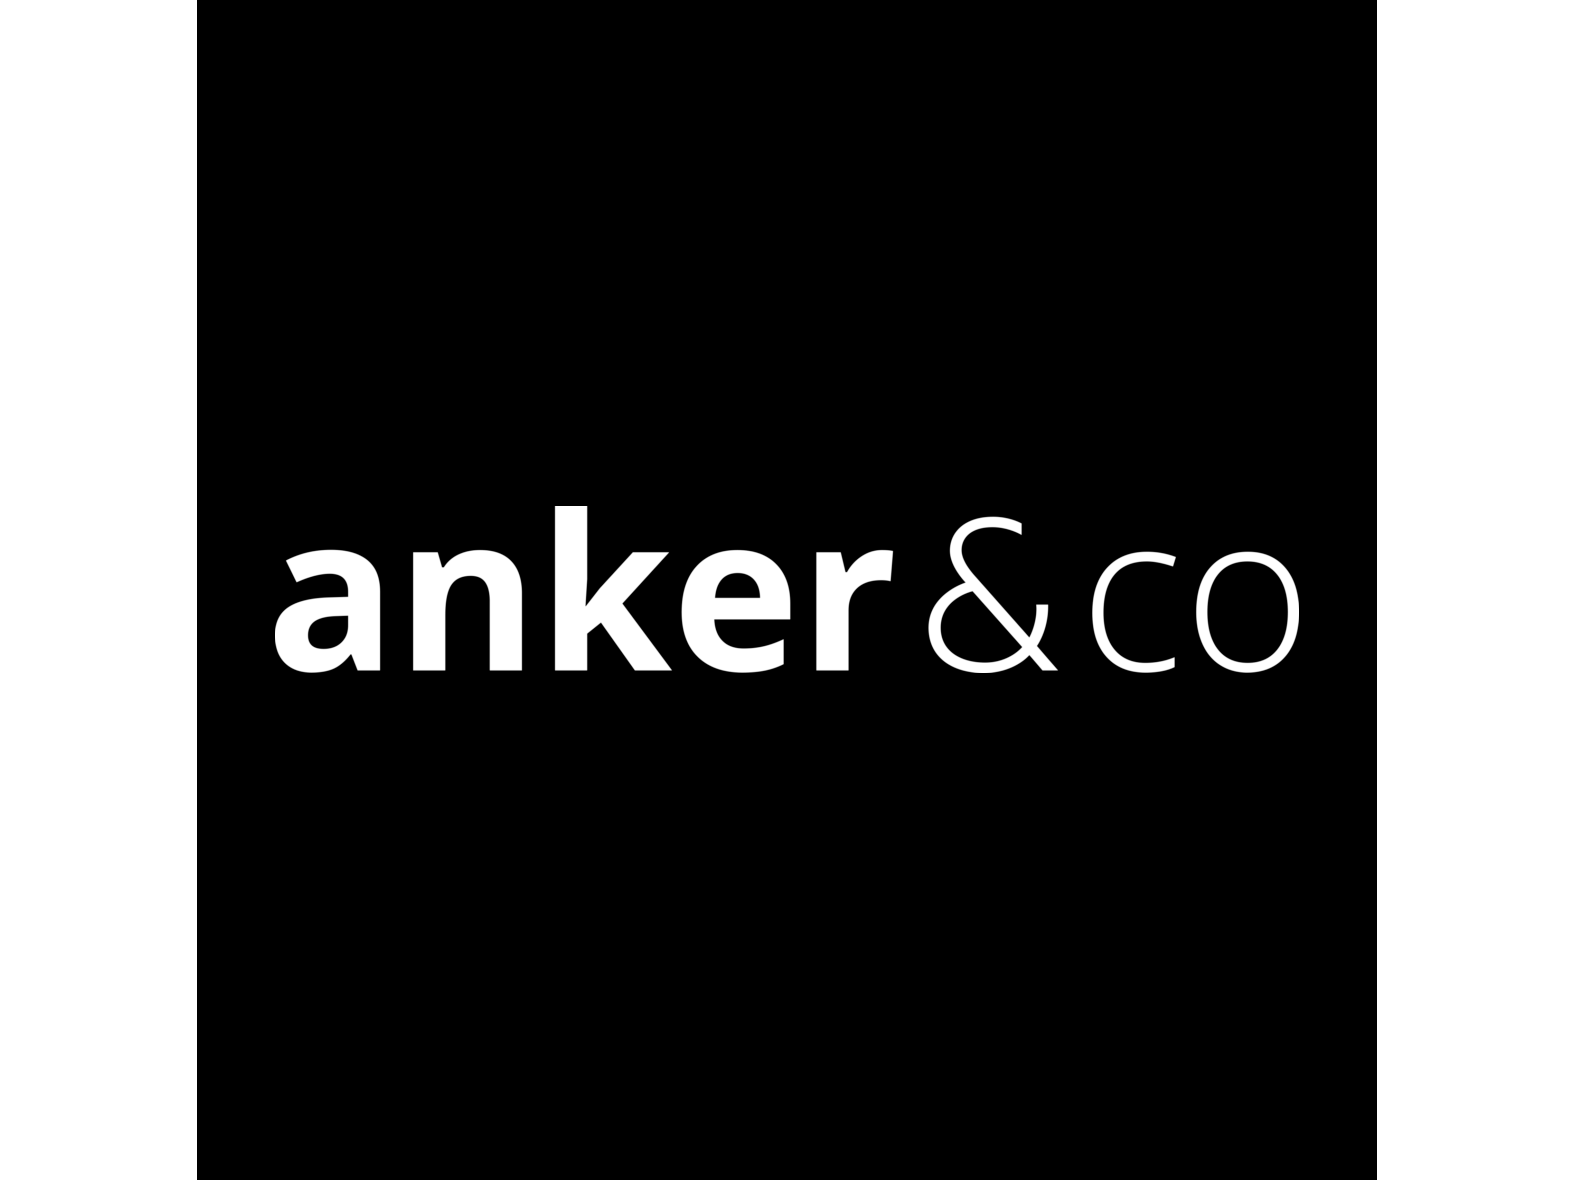 Anker & Co represents well-known international lighting brands such as Michael Anastassiades, Wästberg and XAL. We develop and implement high-quality lighting solutions for offices, shops, hotels, restaurants, public spaces, outdoor areas and private homes in close collaboration with builders, architects and lighting designers. We are showcasing exciting news and would be happy to talk about the lates news in lighting technology and discuss the possibilities of future lighting design.